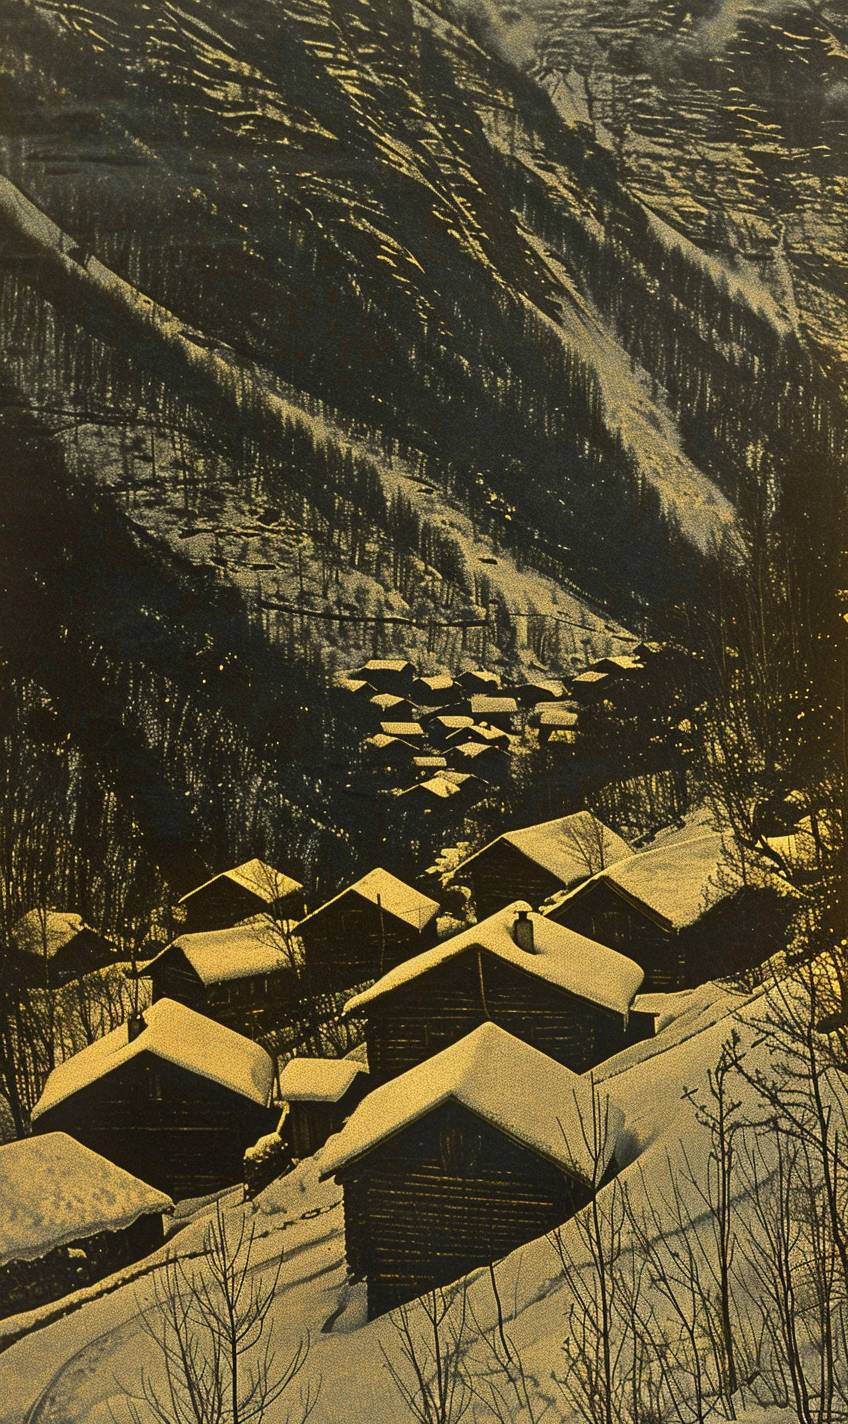 Snow-covered mountain village during winter, cozy wooden houses, smoke rising from chimneys, soft twilight casting a magical glow